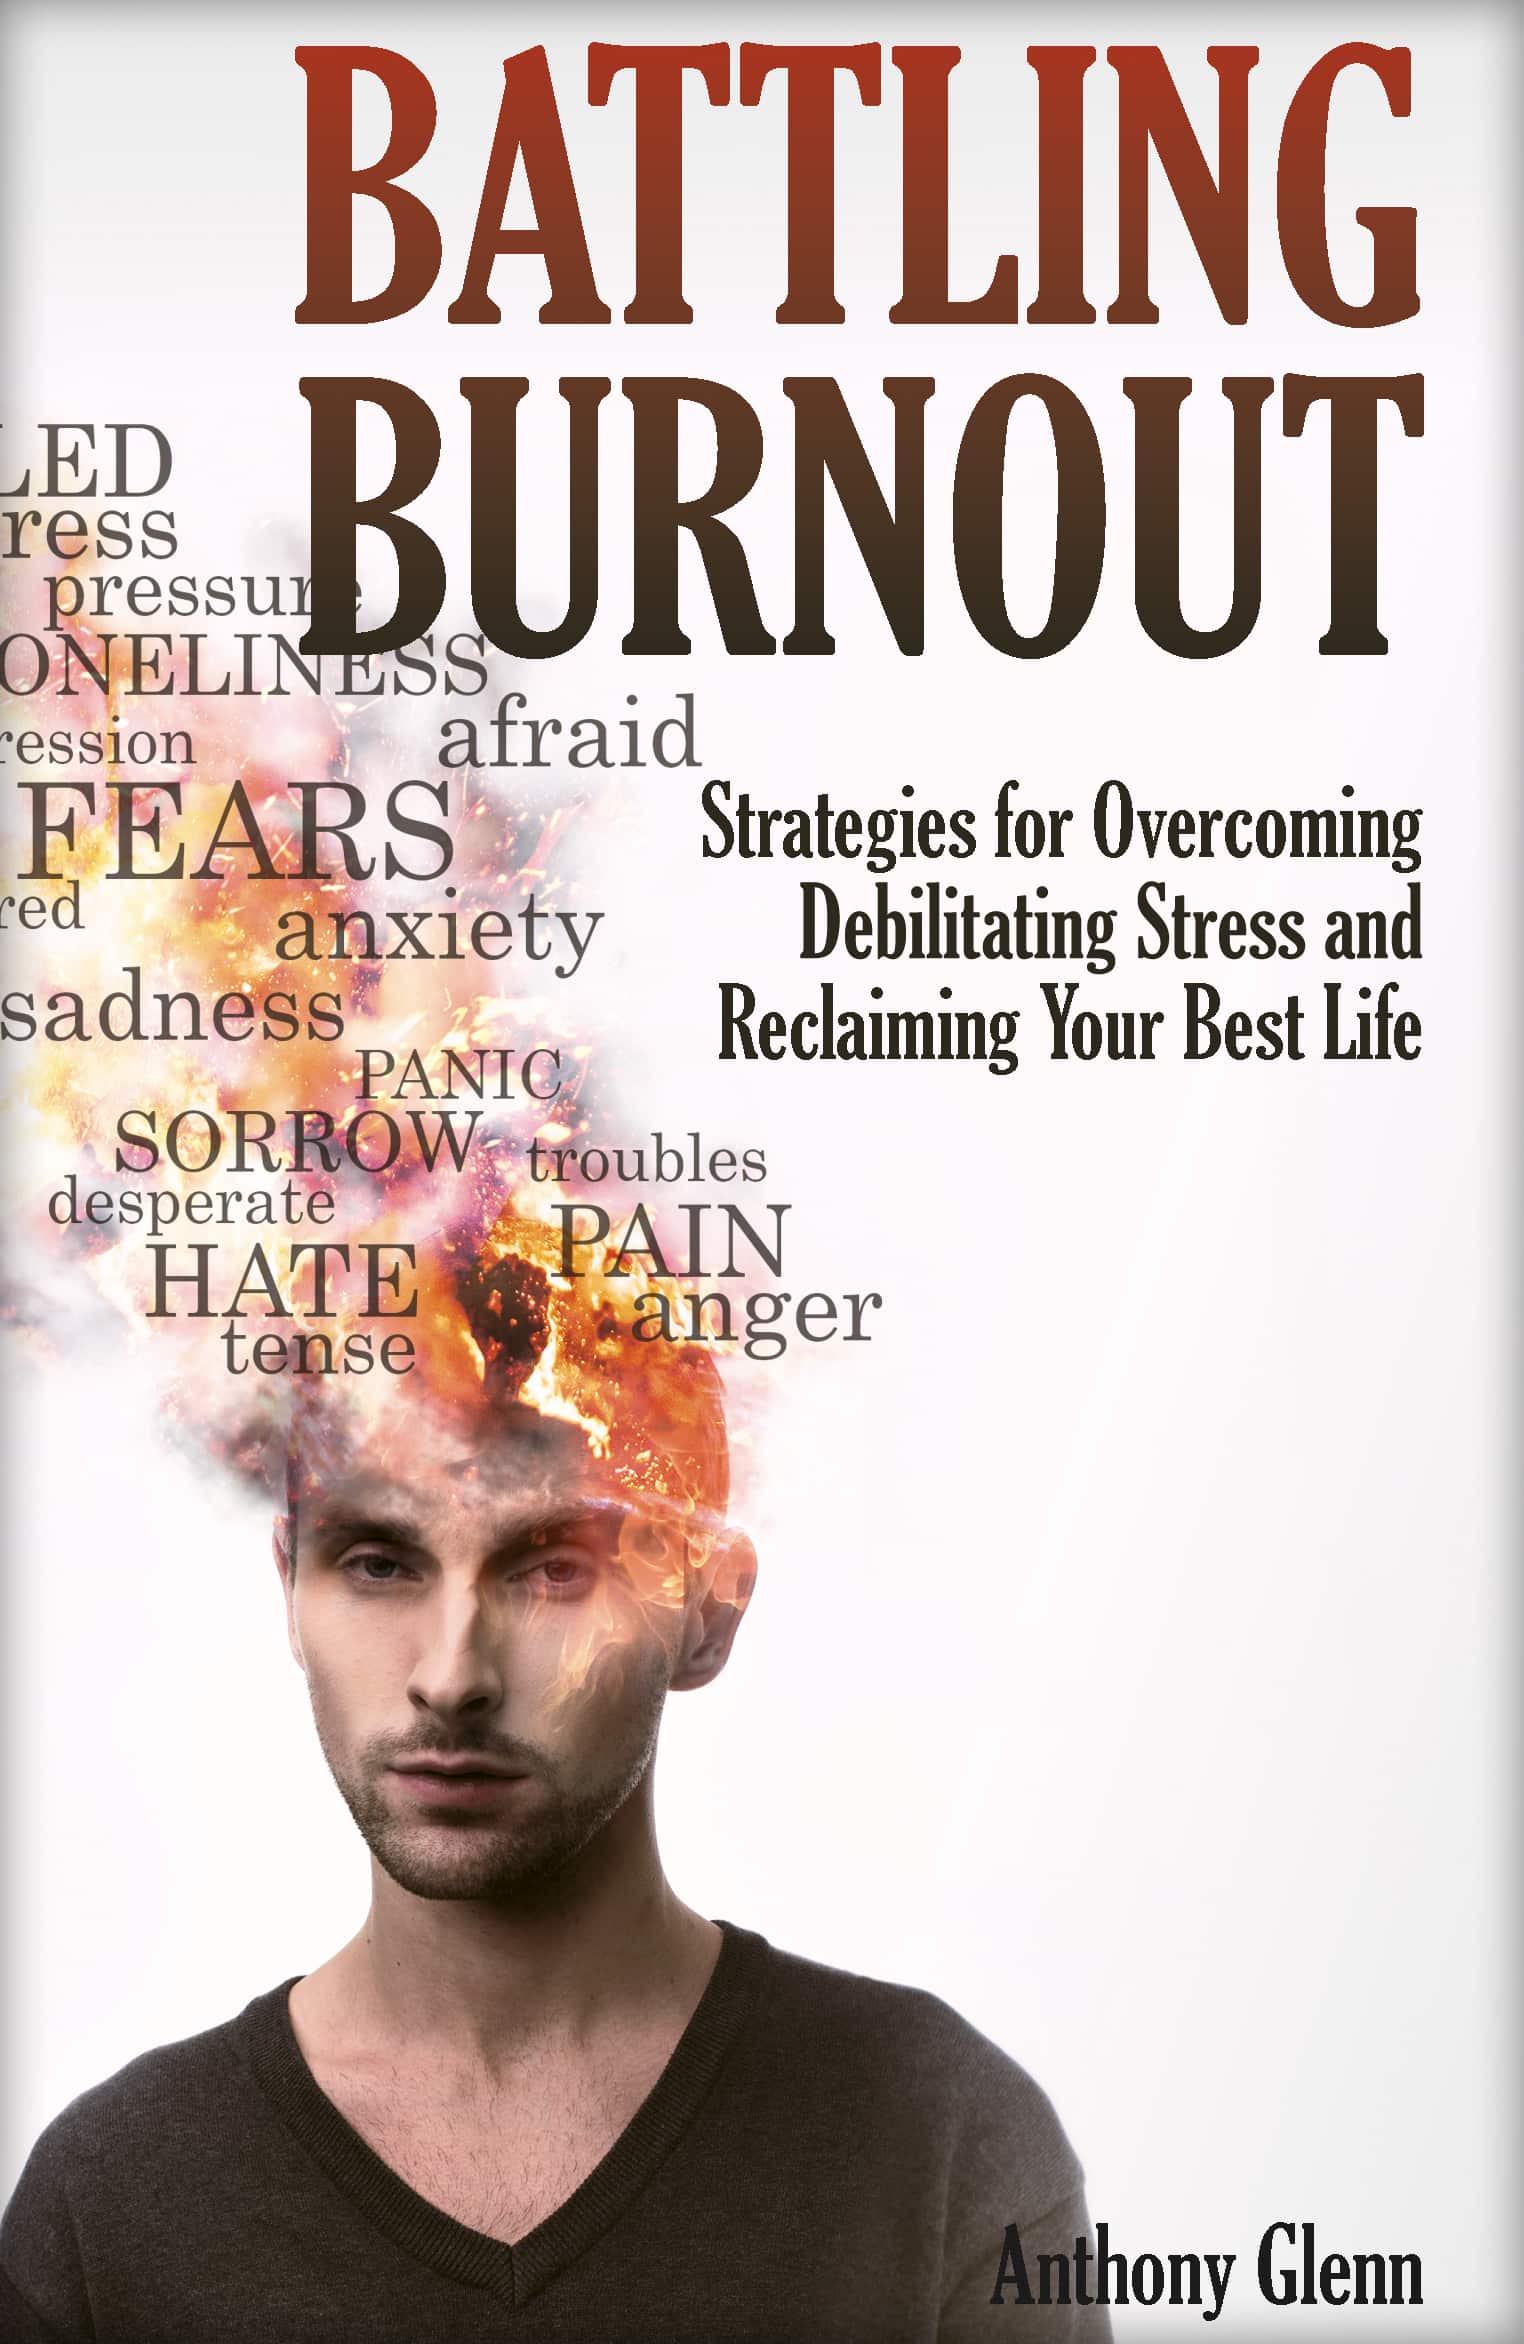 FREE: Battling Burnout: Strategies for Overcoming Debilitating Stress and Reclaiming Your Best Life by Anthony Glenn